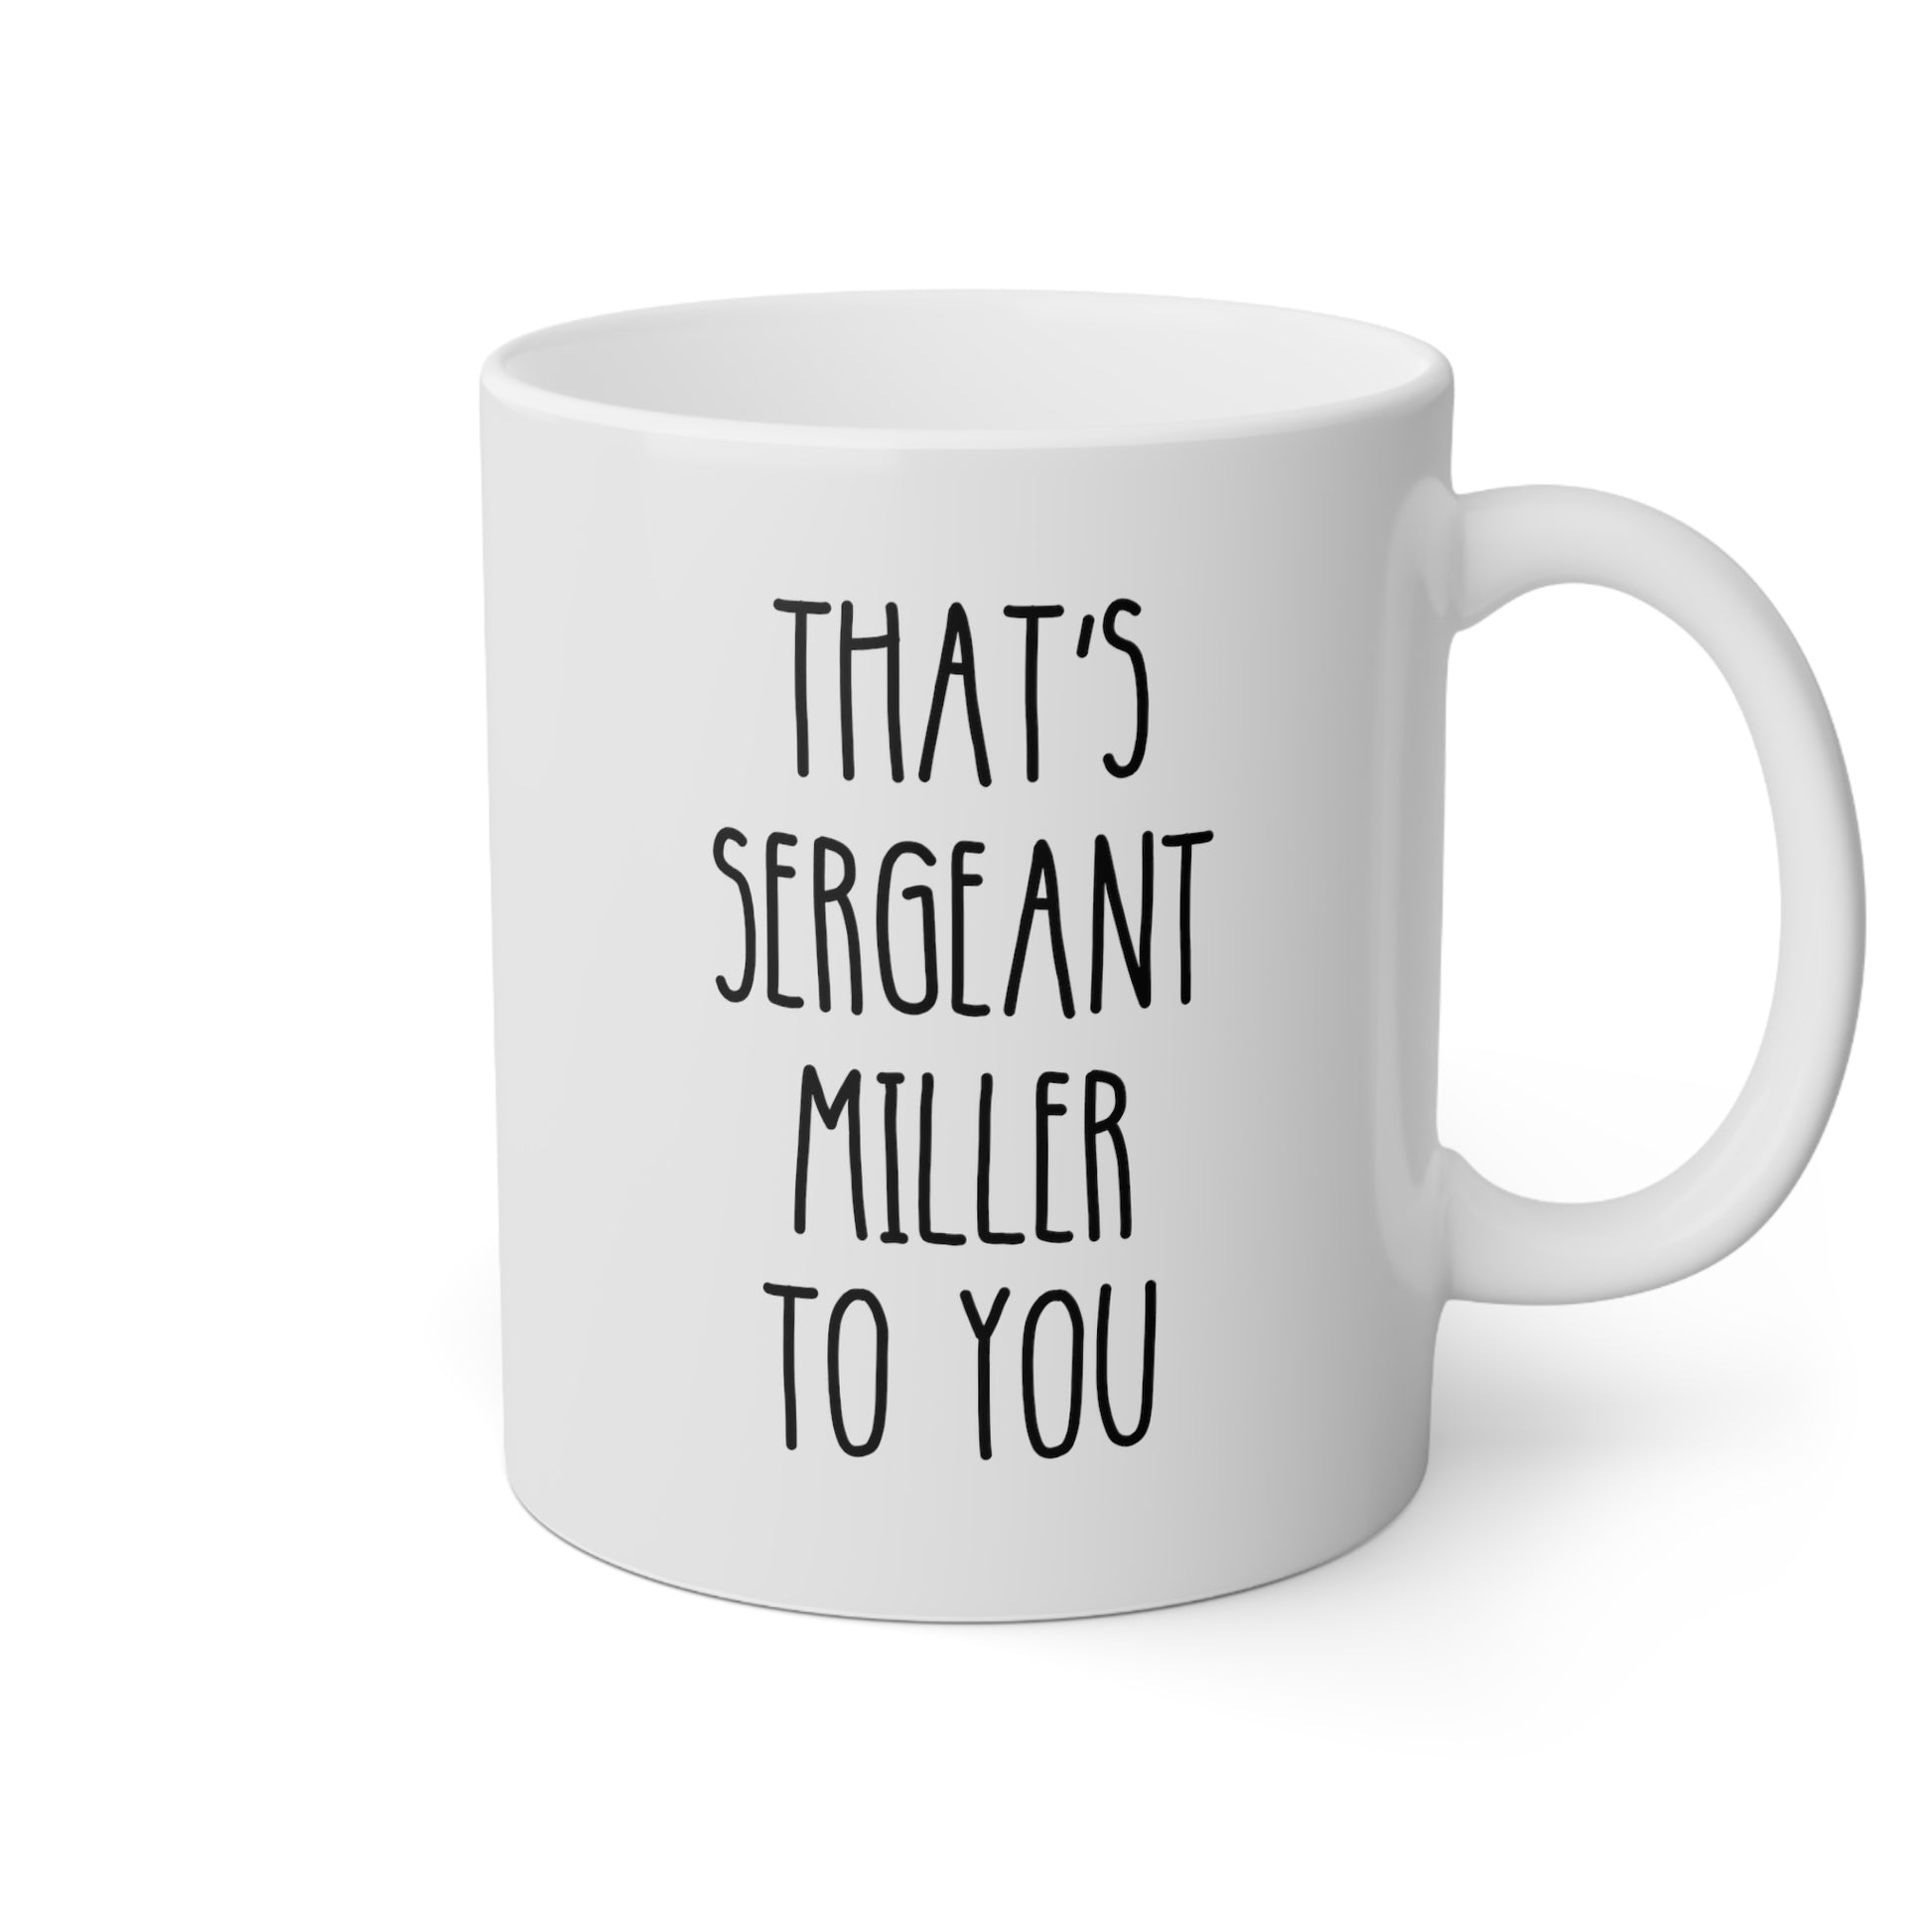 Thats Sergeant Miller To You 11oz white funny large coffee mug gift for sergeant cop police promotion appreciation gift waveywares wavey wares wavywares wavy wares